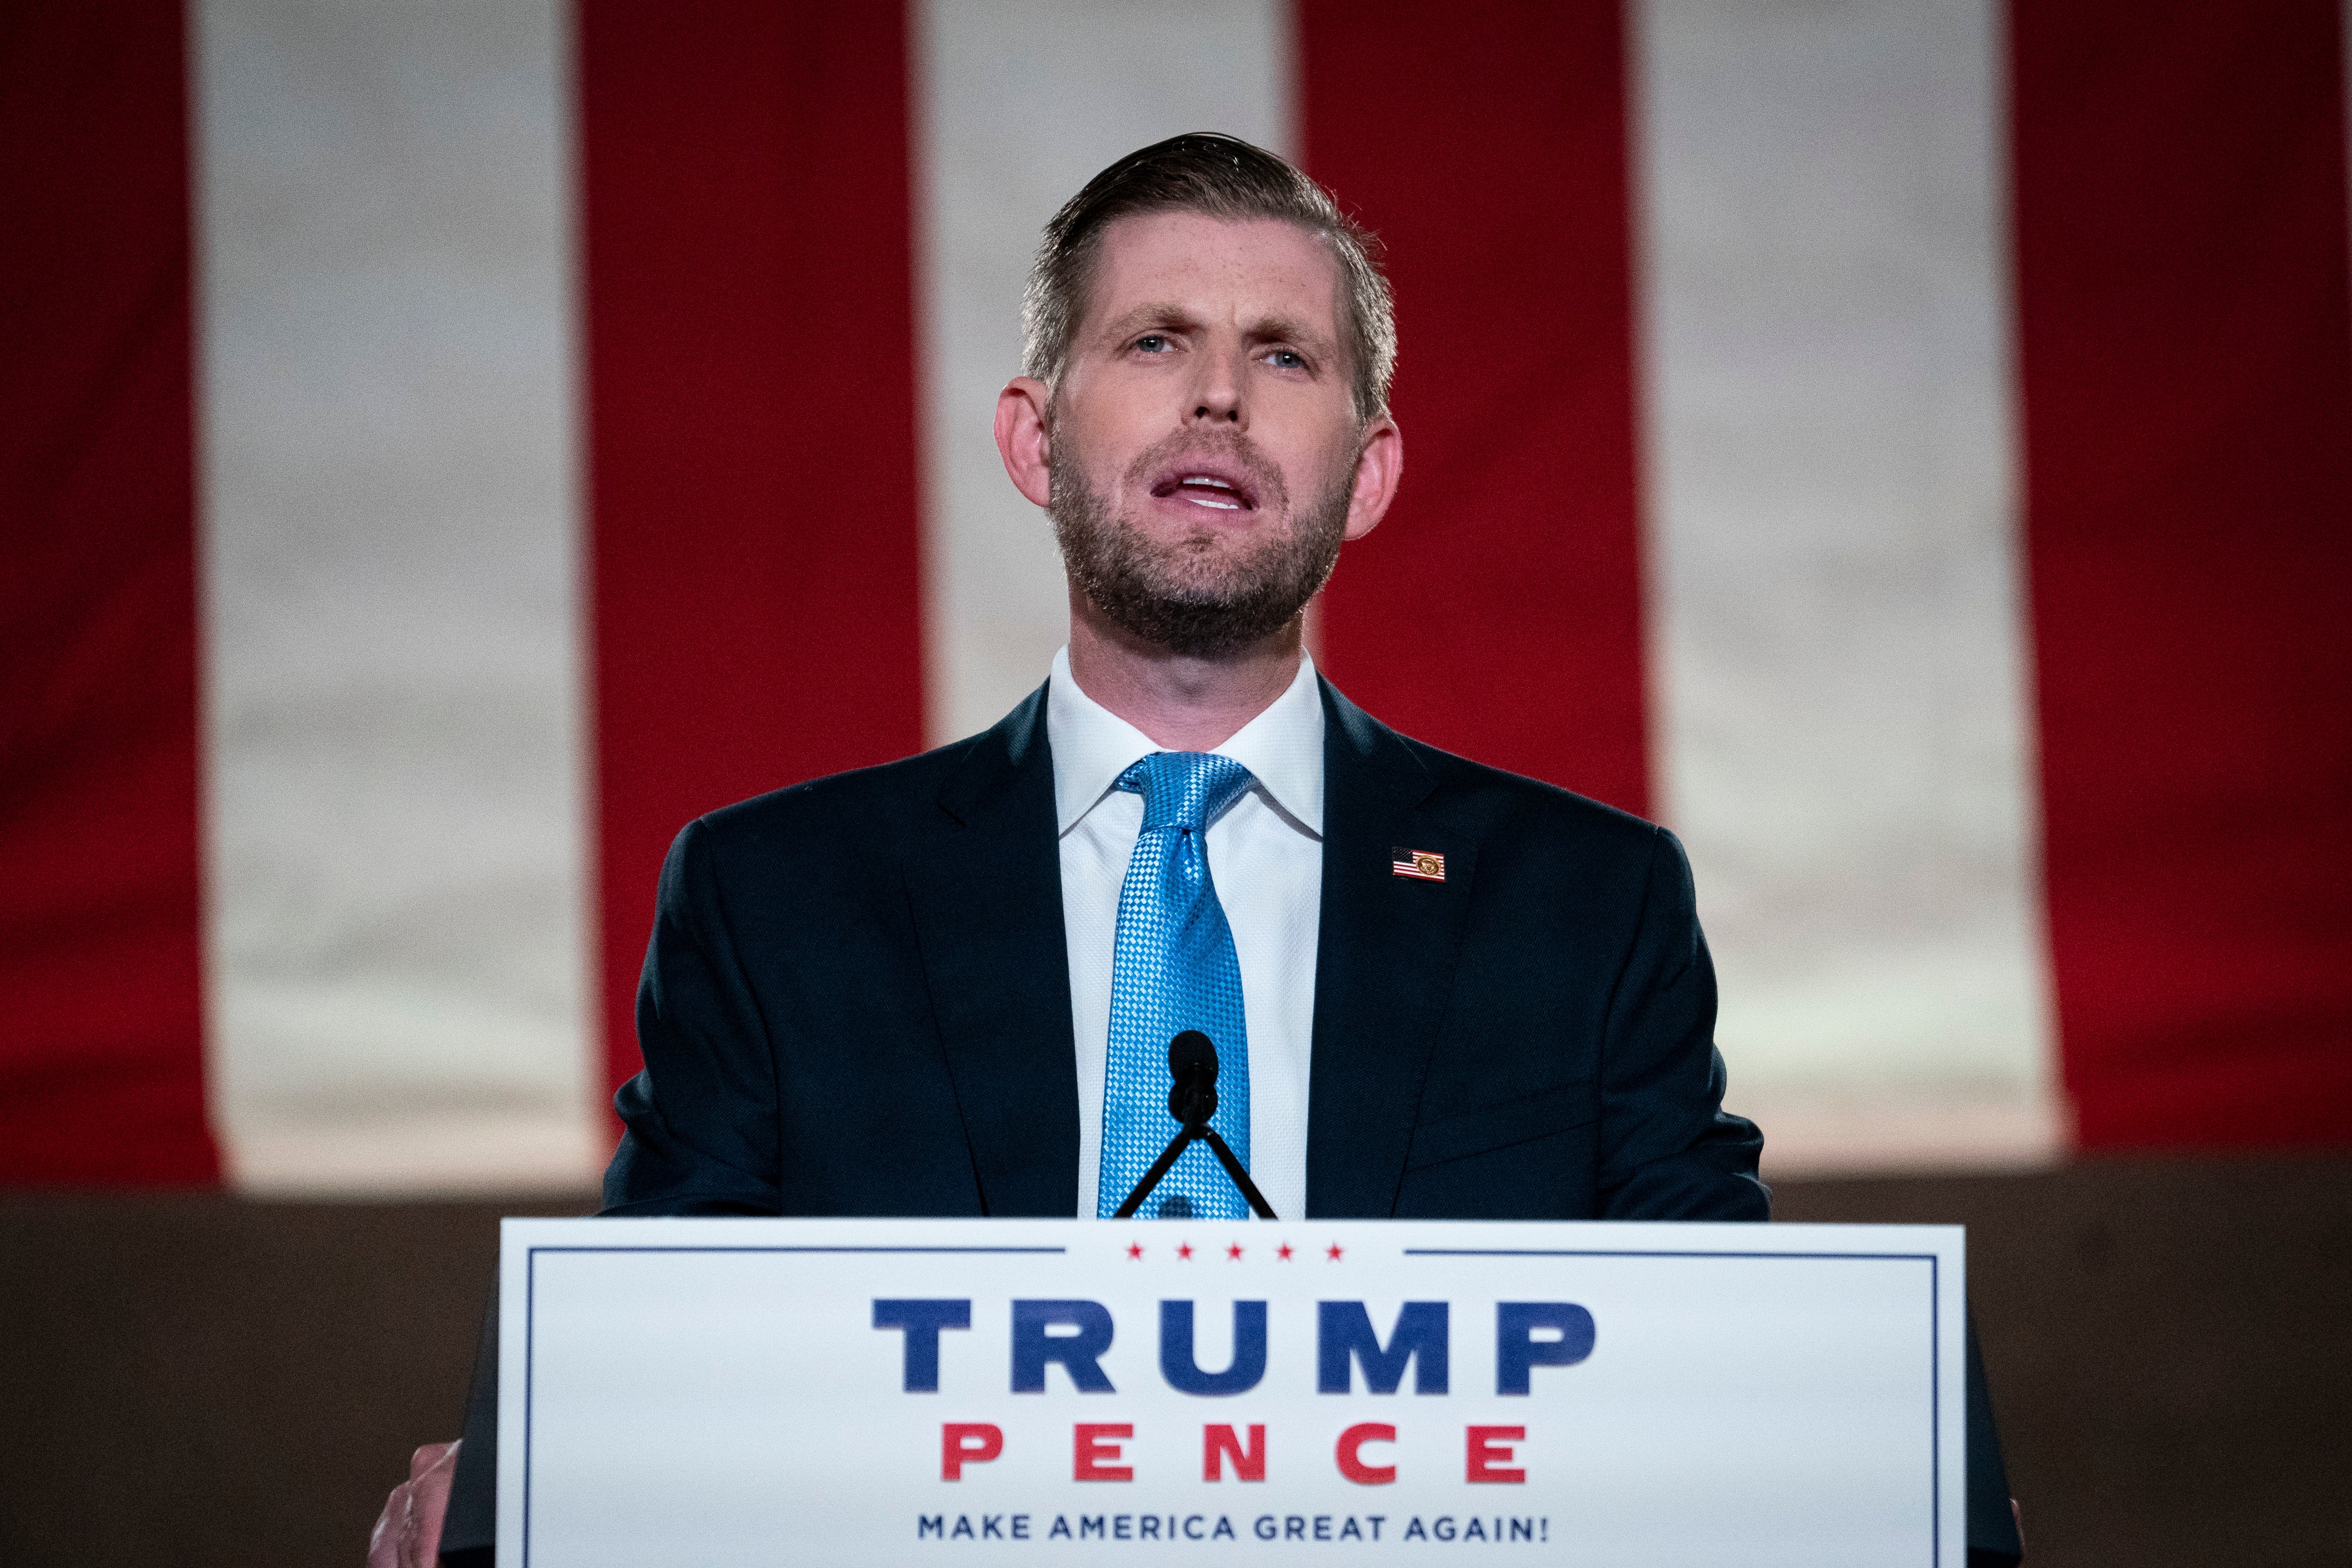 Eric Trump’s tweet of burning ballots was flagged by Twitter as being untrue